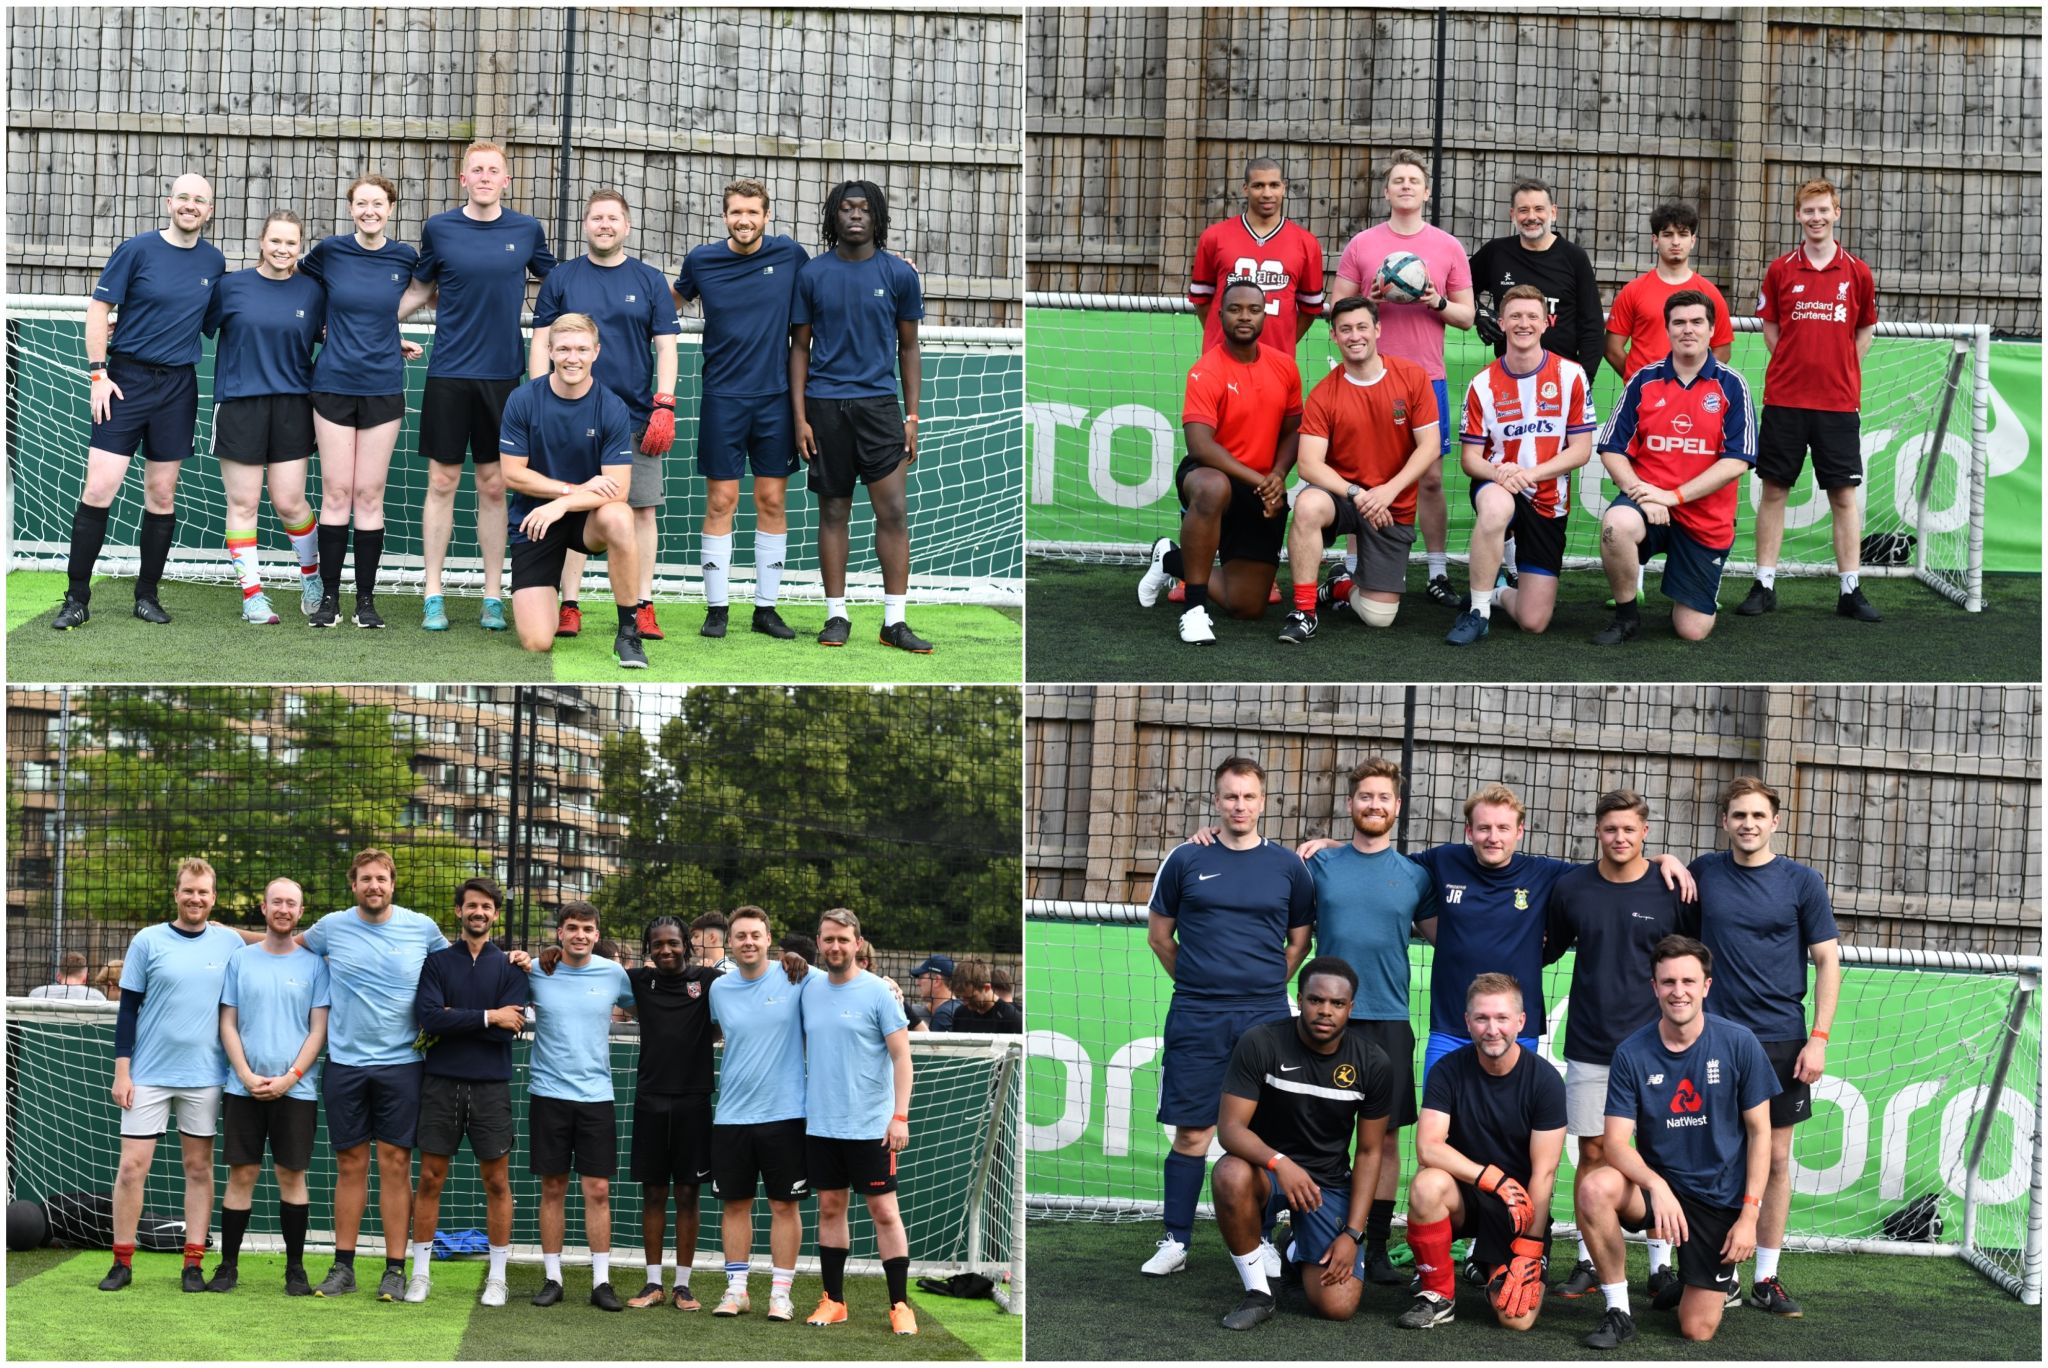 Inflexion Kinetic Football Fundraising Tournament